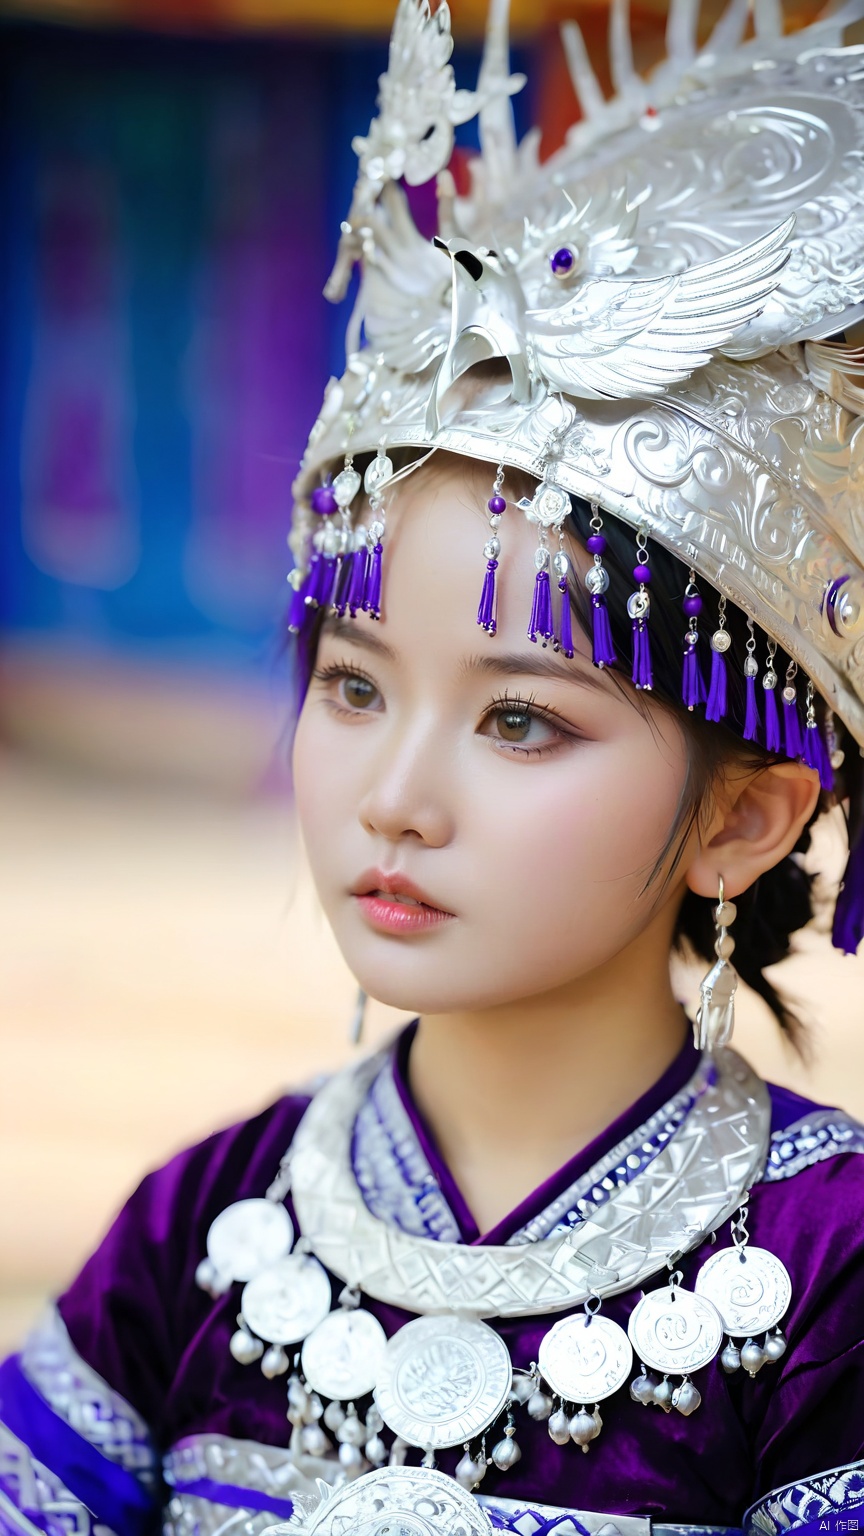 1girl, Close-up, upper body, sideways, looking at the camera, shut up, silver metal headdress, complex headdress, complex jewelry, round silver necklace, Hmong costume, purple Hmong costume, miao Silver Phoenix Crown, jewelry, lips, short hair, solo, blurred background, depth of field,Miao Silver Phoenix Crown